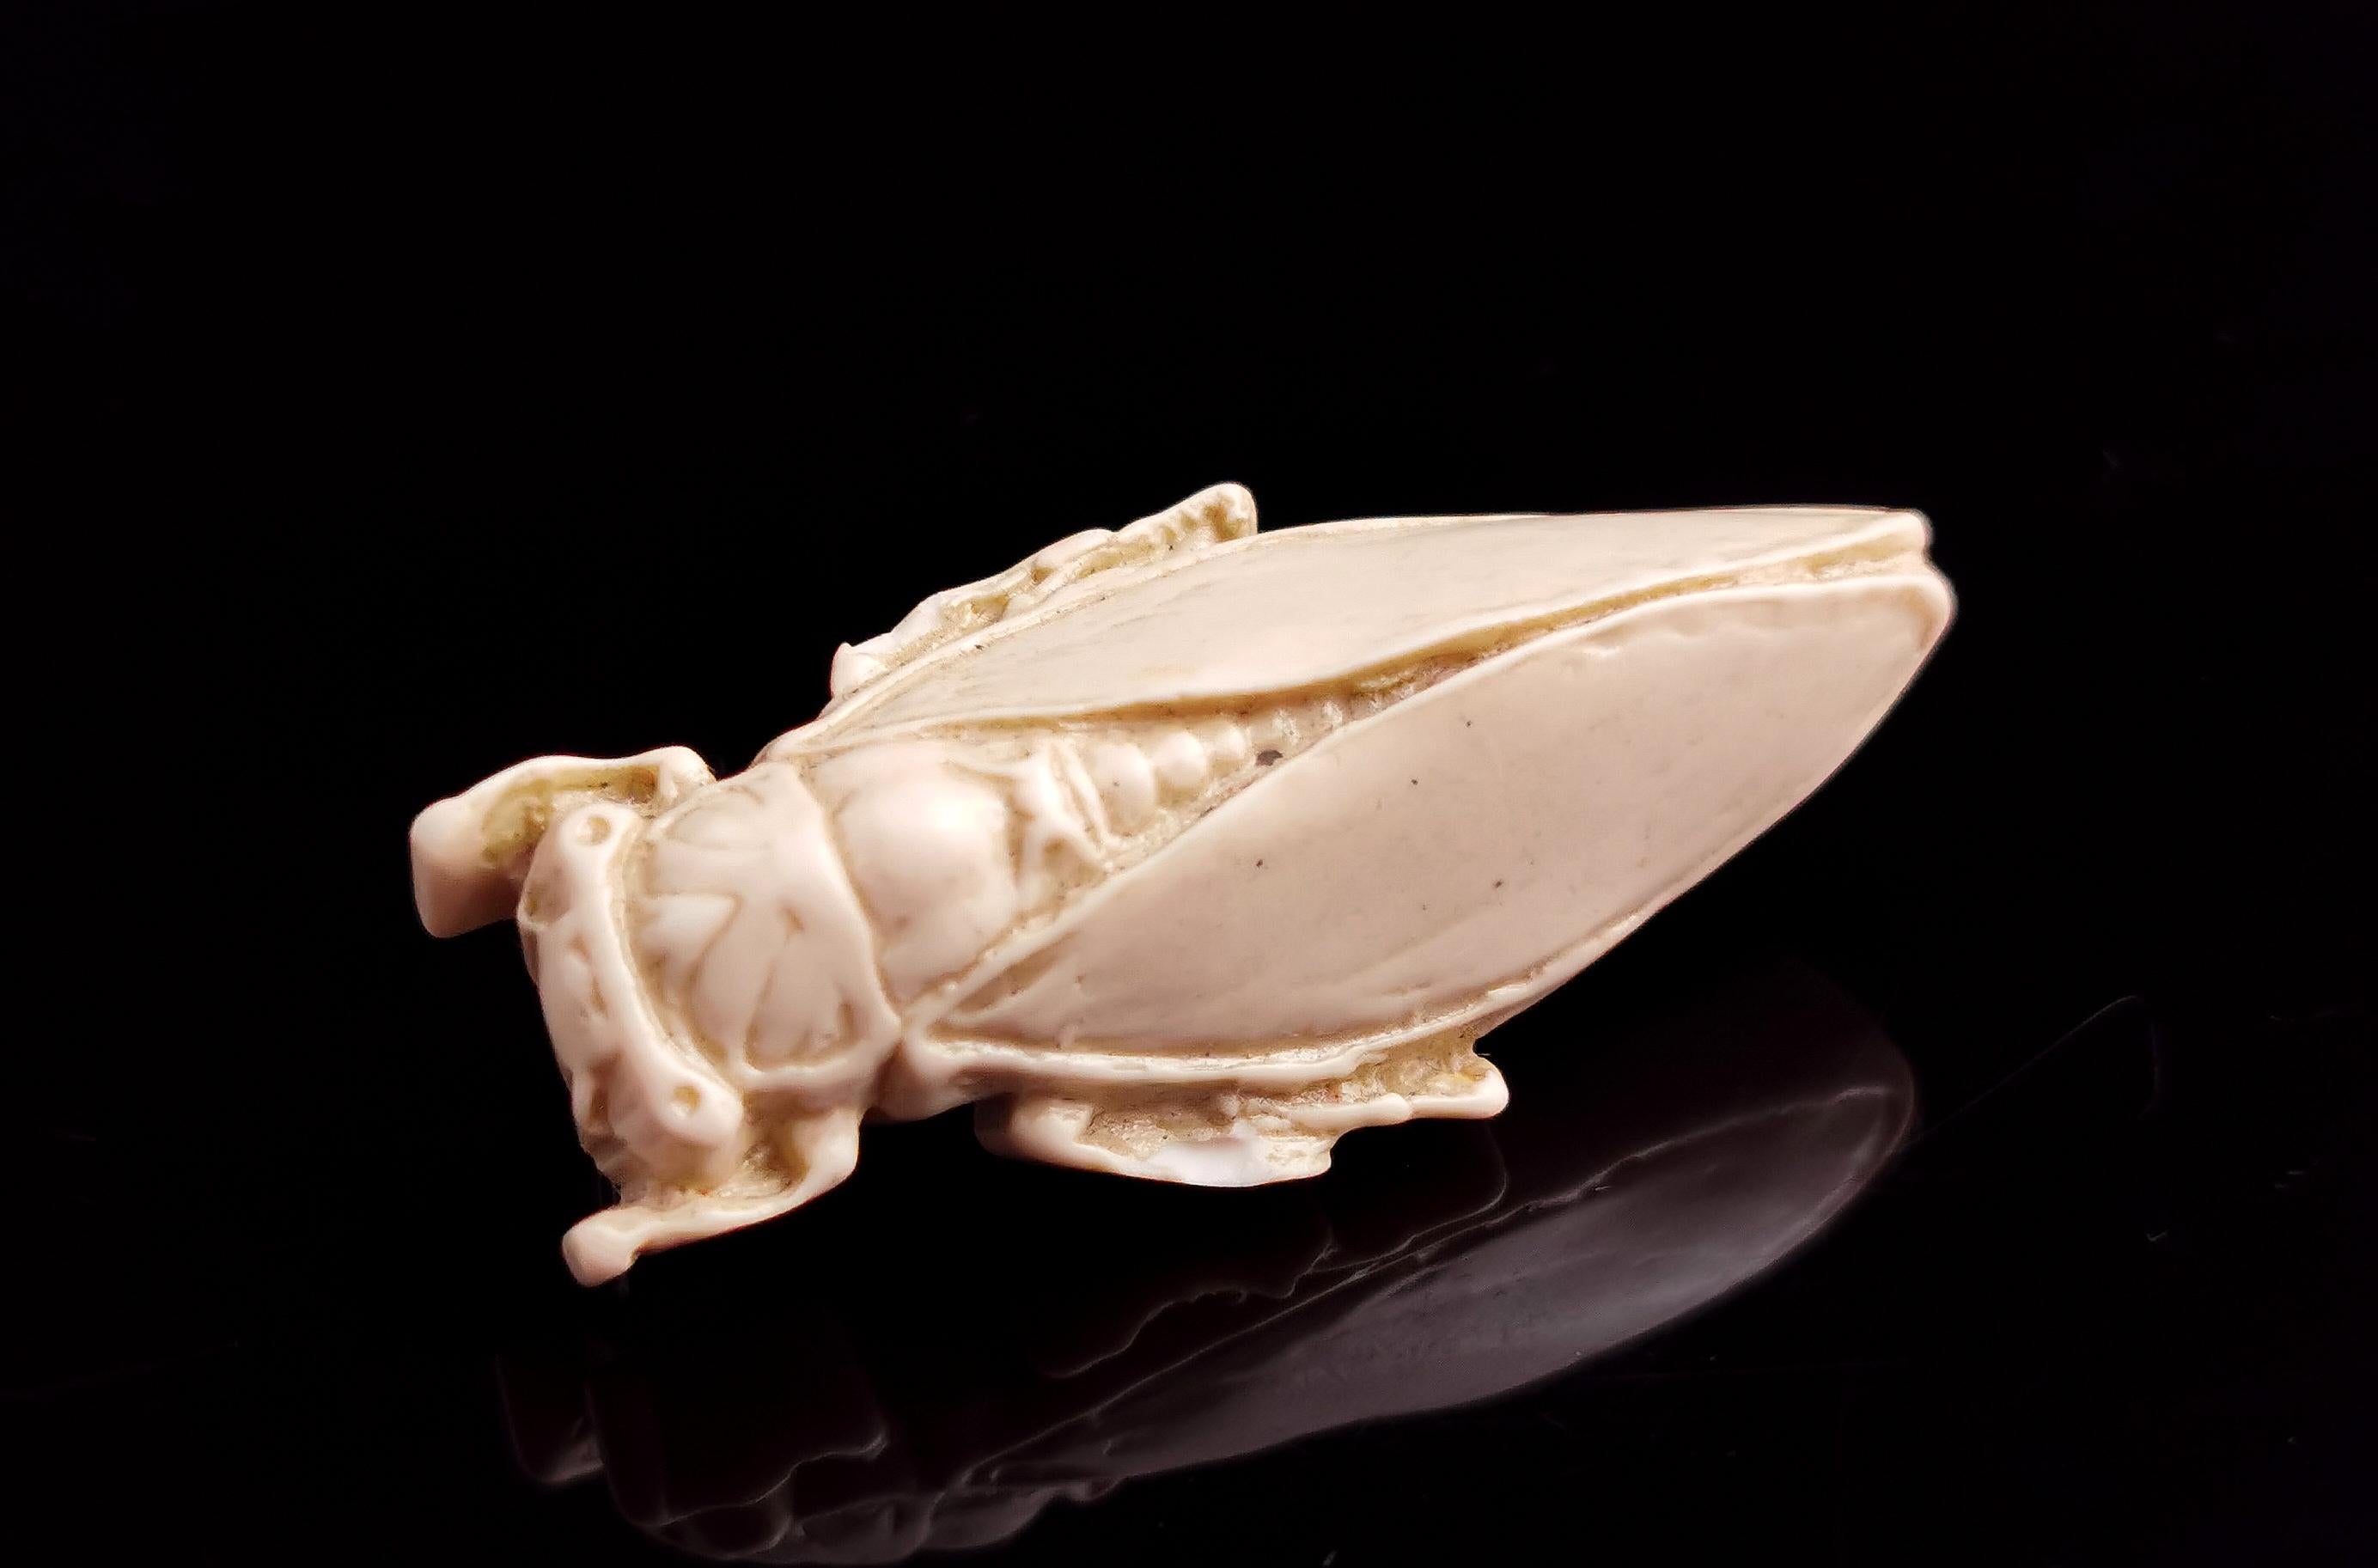 A fab vintage ivorine or faux bone resin cicada brooch.

Made in an Art Nouveau style, this is a later vintage piece made from molded resin and painted in a warm creamy beige.

It is a medium size fairly lightweight brooch and has a brass safety